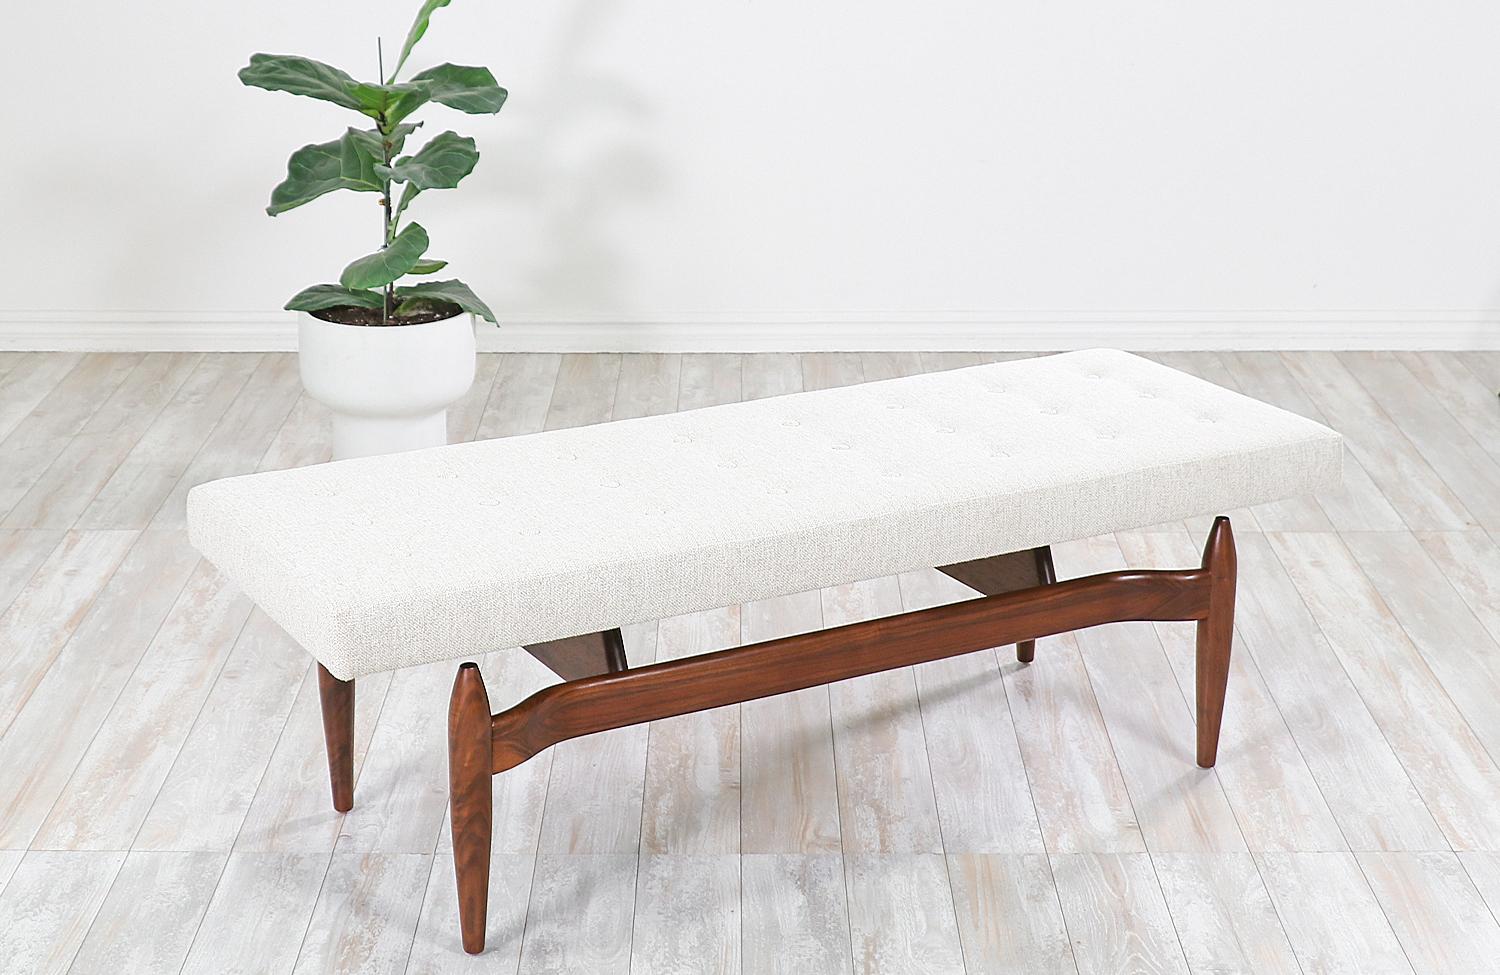 Introducing our first-ever modern bench designed and crafted by Danish modern L.A.'s artisans' house in Los Angeles, CA. Our skillfully crafted bench is made from American walnut that features a floating aesthetic and sculpted taper legs. Its tufted